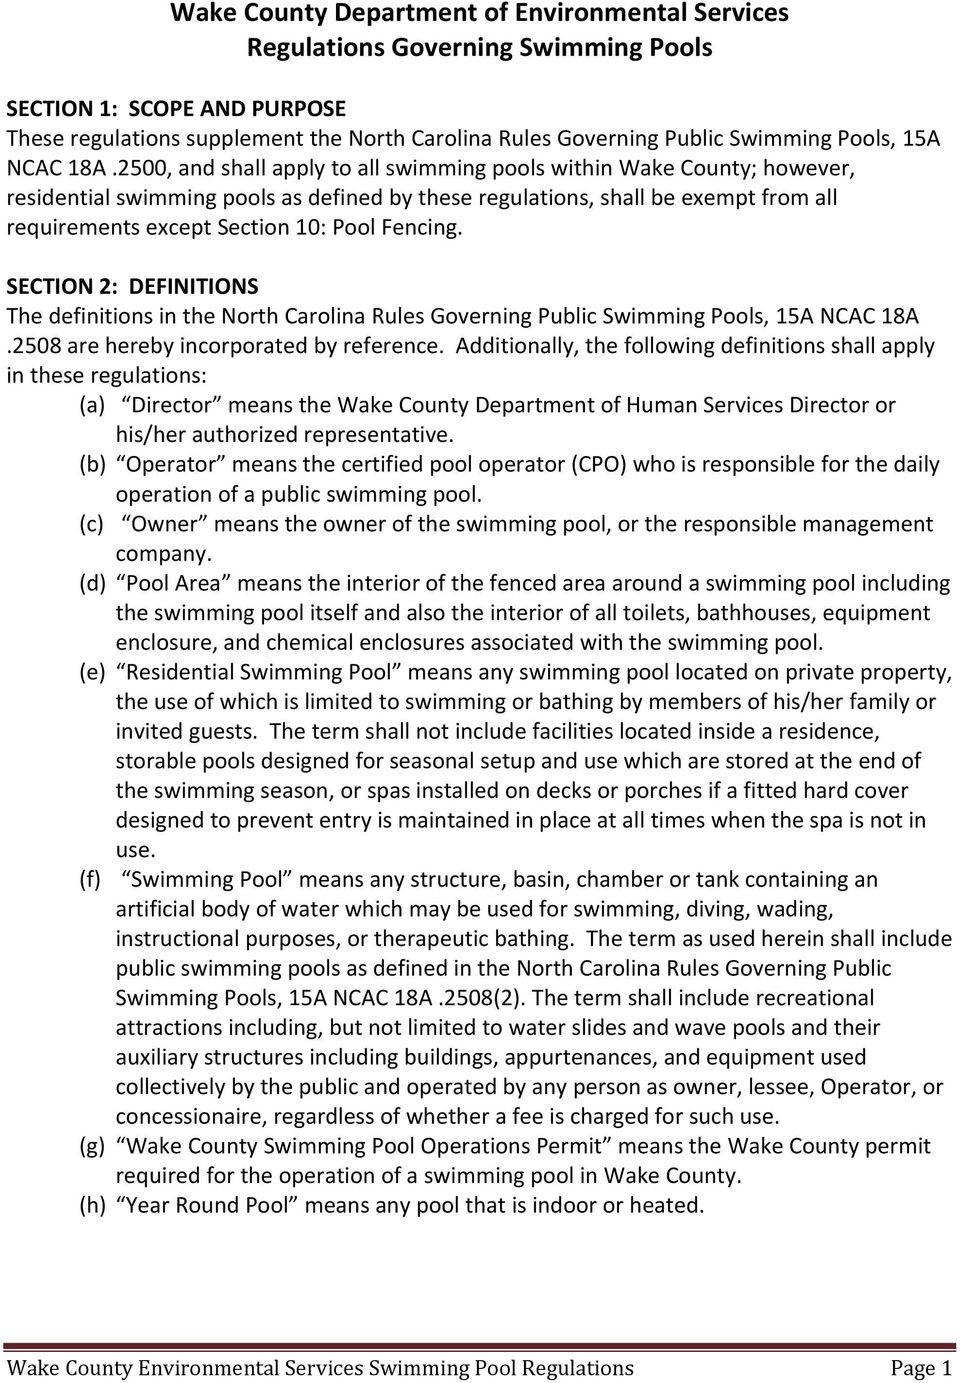 2500, and shall apply to all swimming pools within Wake County; however, residential swimming pools as defined by these regulations, shall be exempt from all requirements except Section 10: Pool